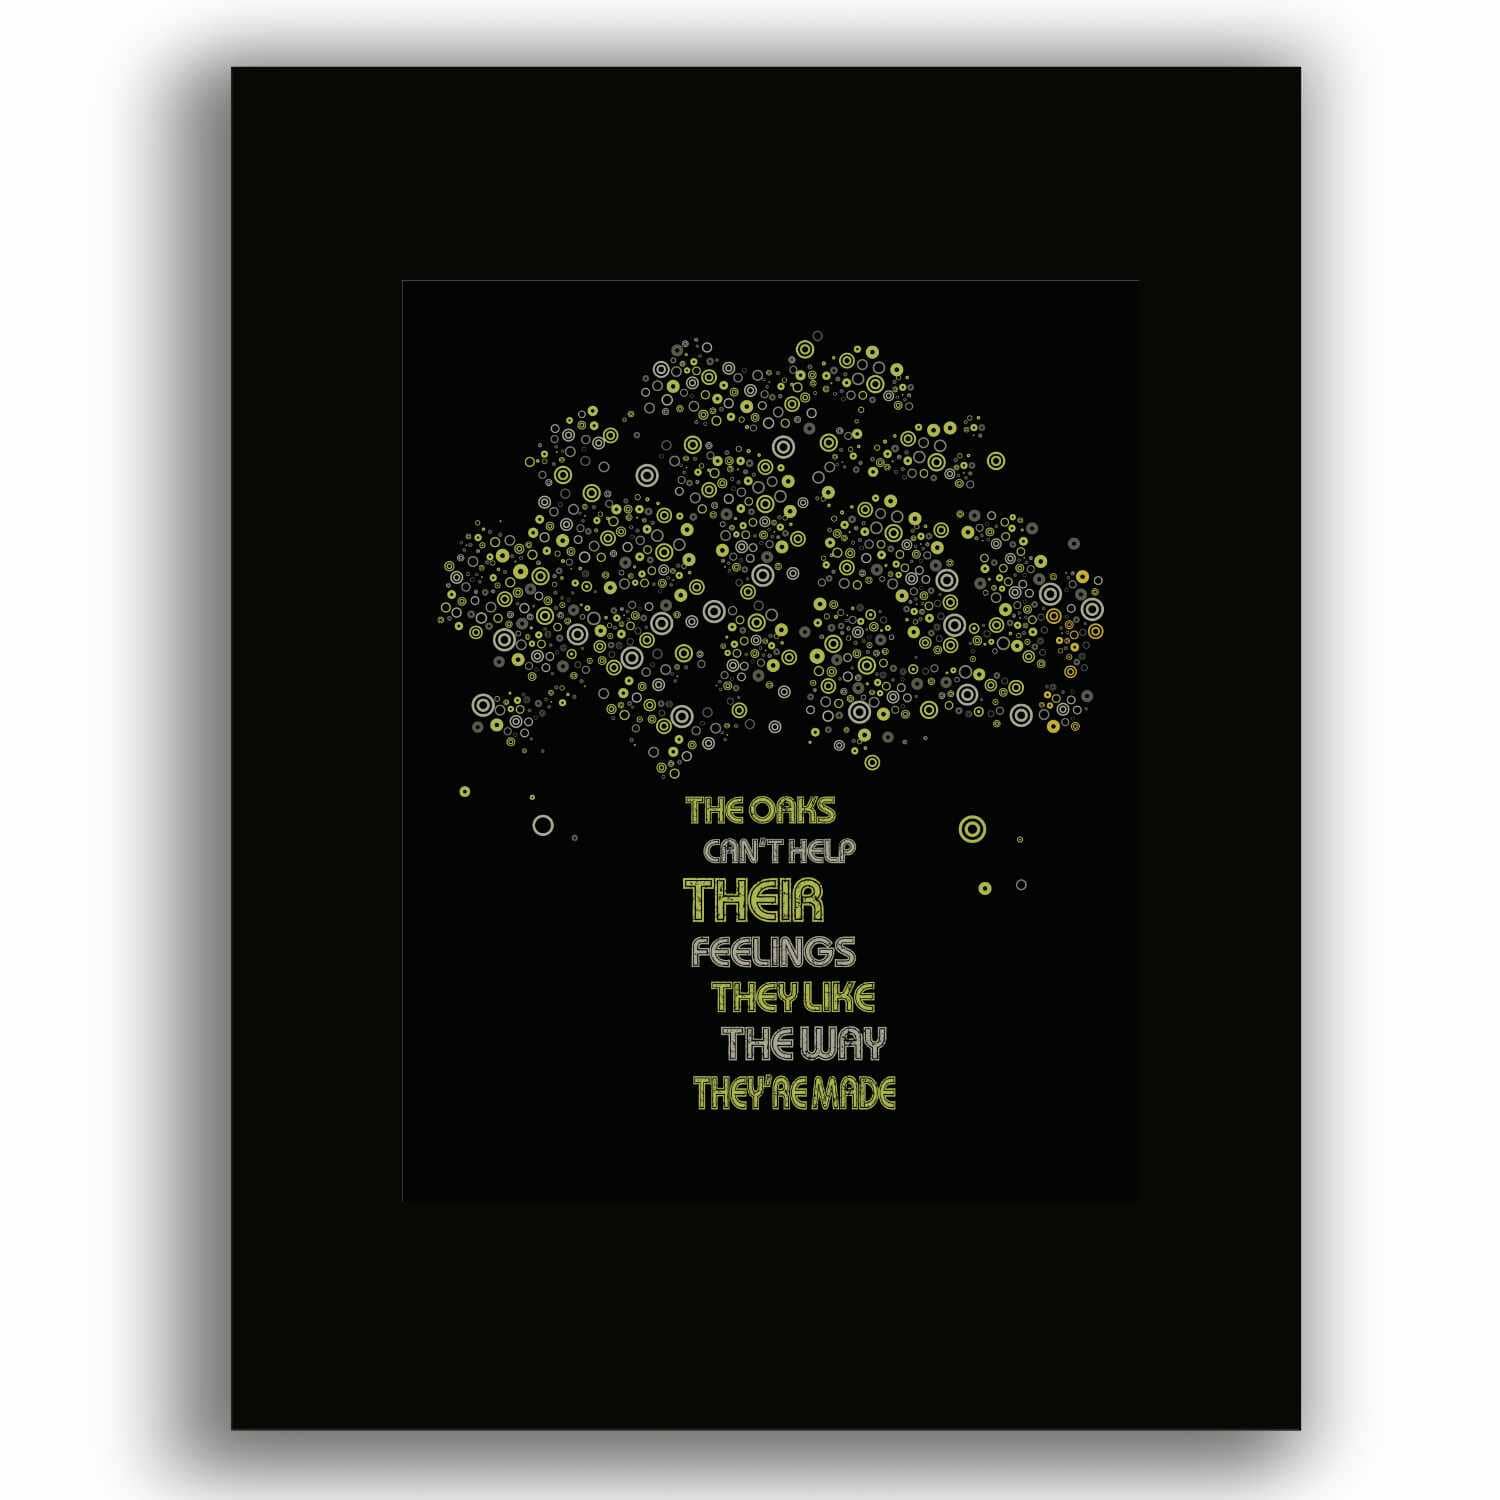 The Trees by Rush - Lyric Inspired Song Art Rock Music Print Song Lyrics Art Song Lyrics Art 8x10 Black Matted Print 